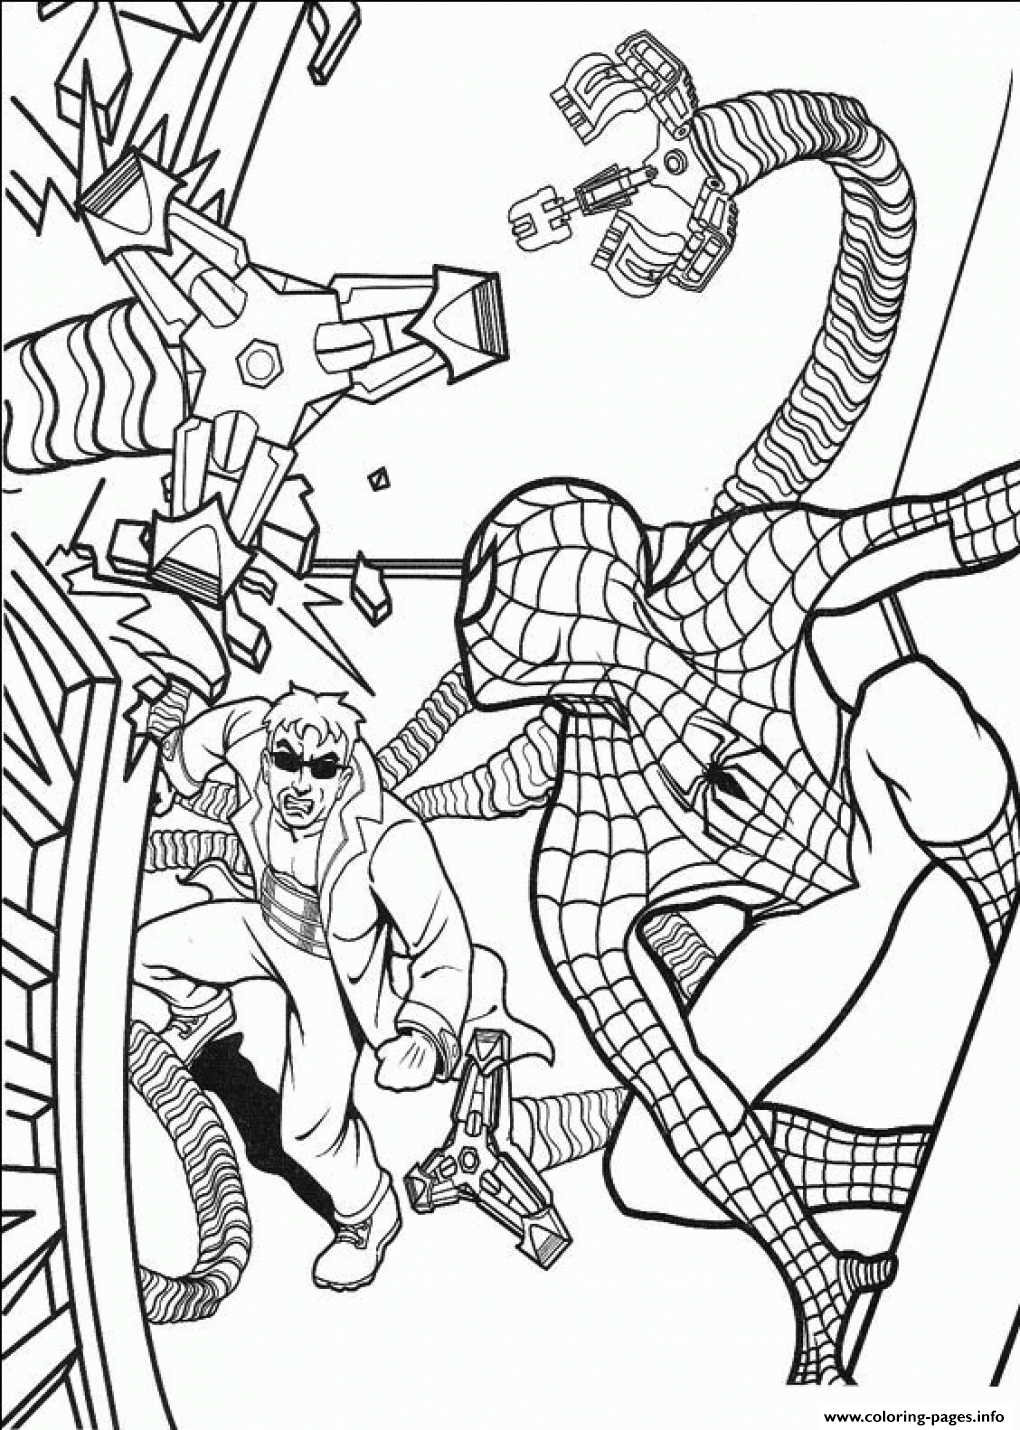 Spectacular Spiderman S Free2503 coloring